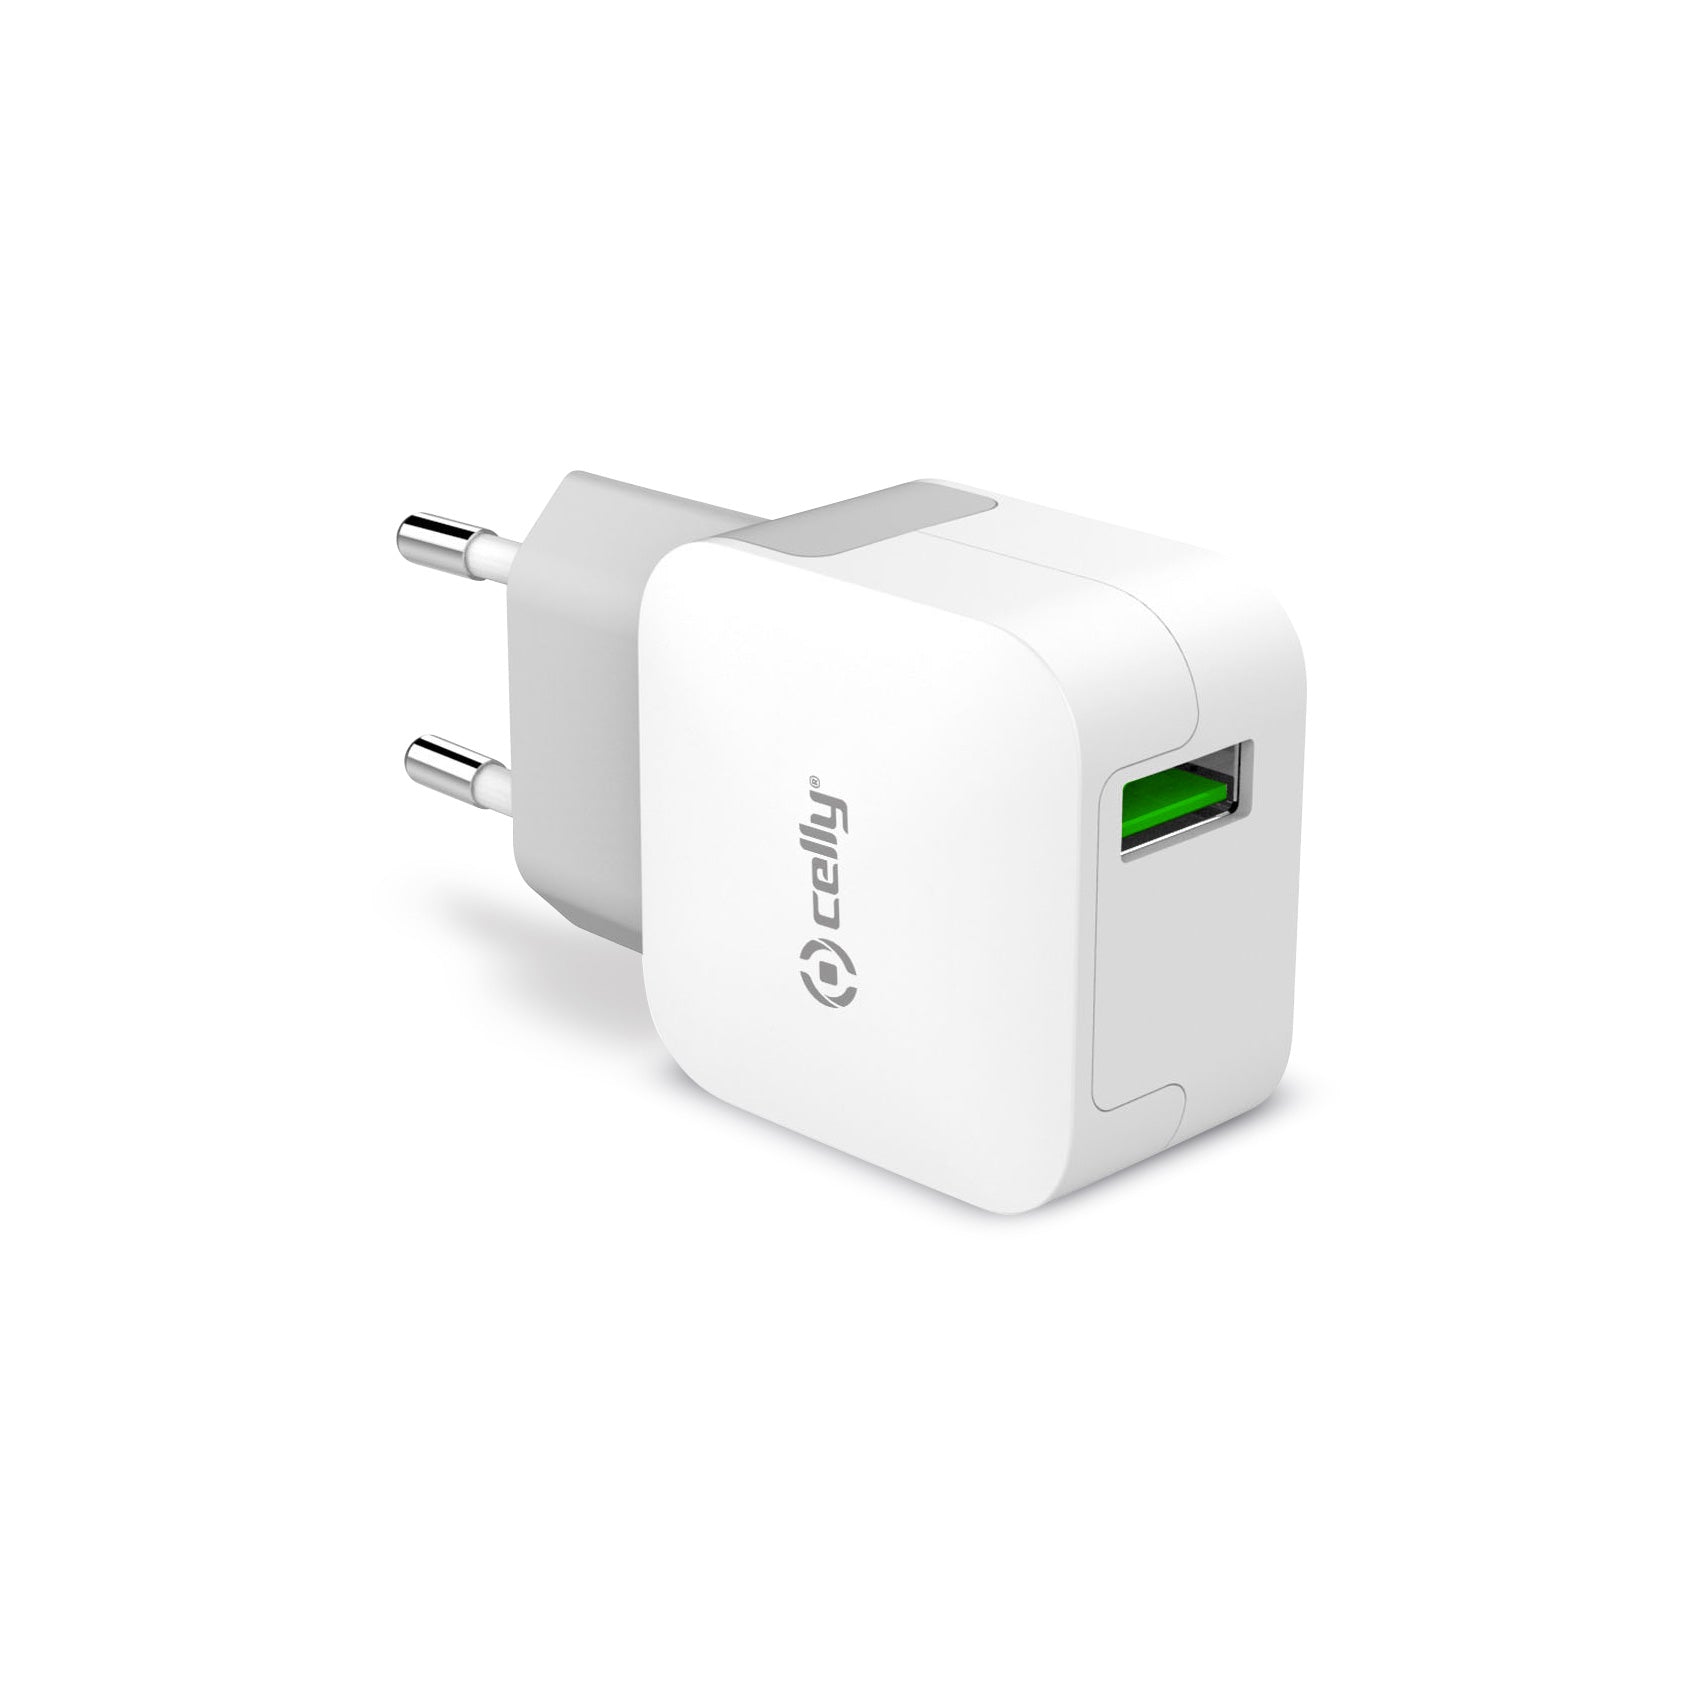 TURBO TRAVEL CHARGER USB 2.4A/12W